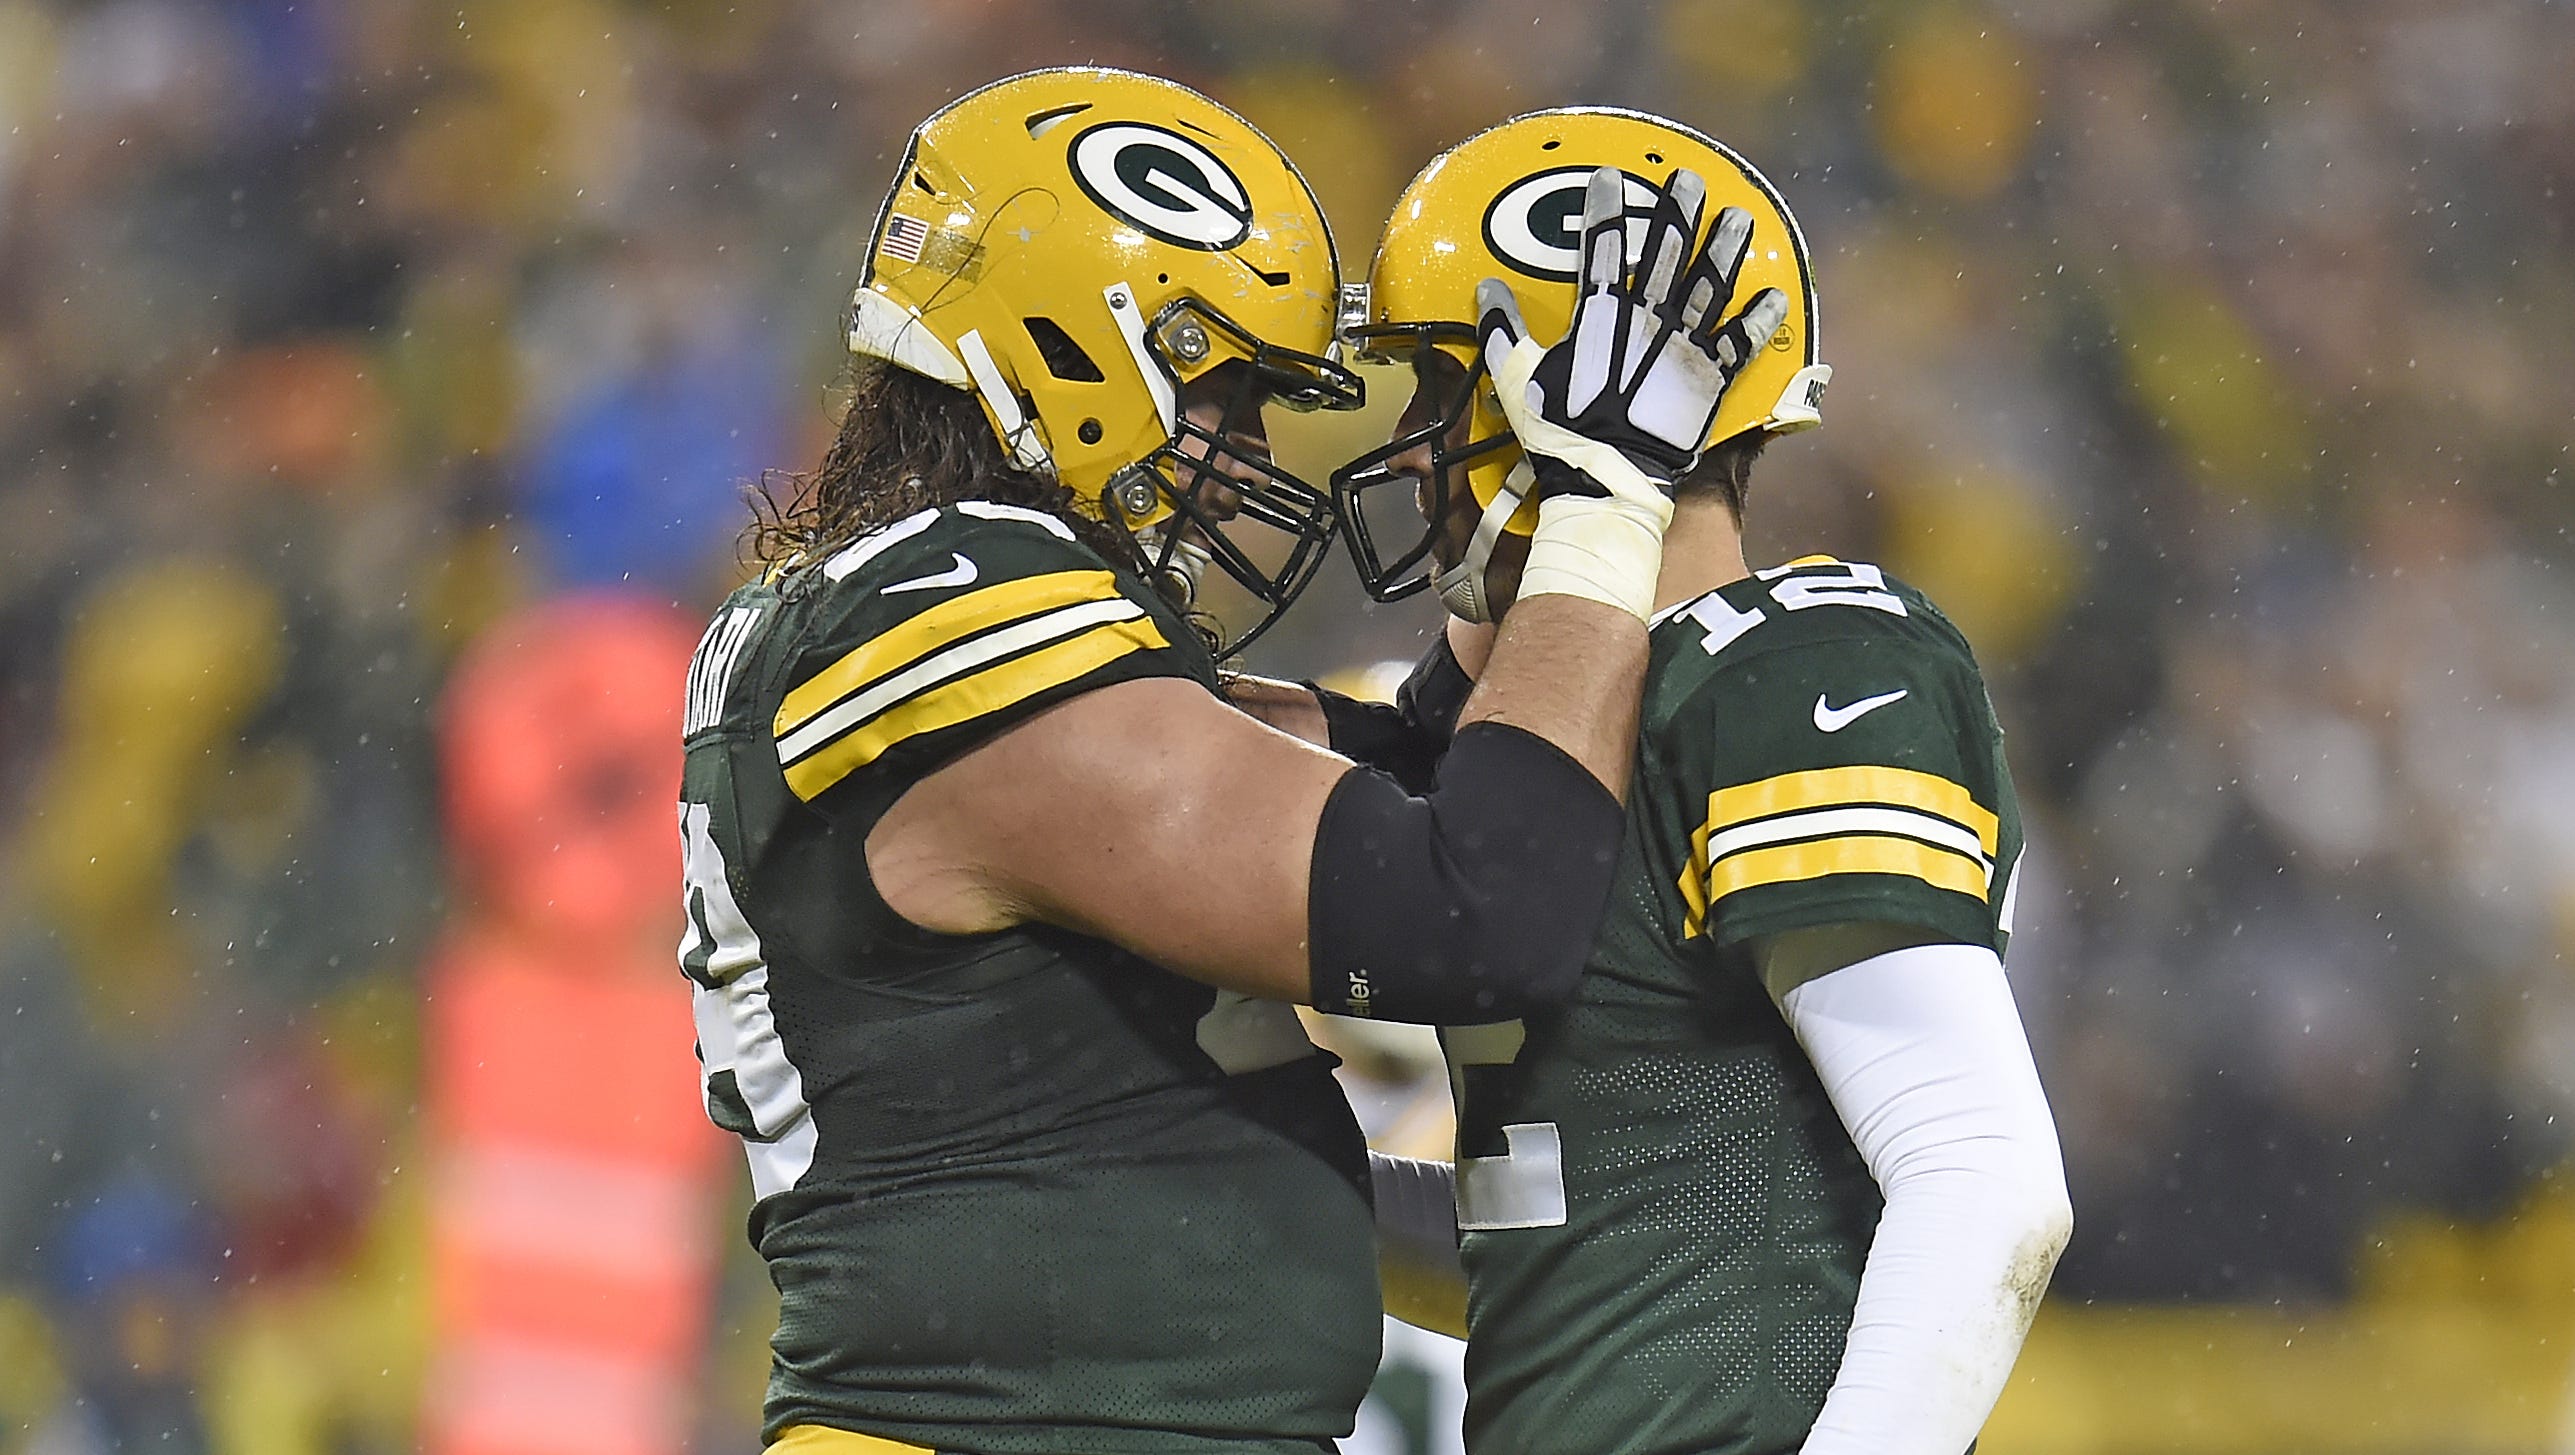 Green Bay Packers quarterback Aaron Rodgers (12) celebrates a touchdown with left tackle David Bakhtiari (69) against the Dallas Cowboys on Dec. 13, 2015, at Lambeau Field.